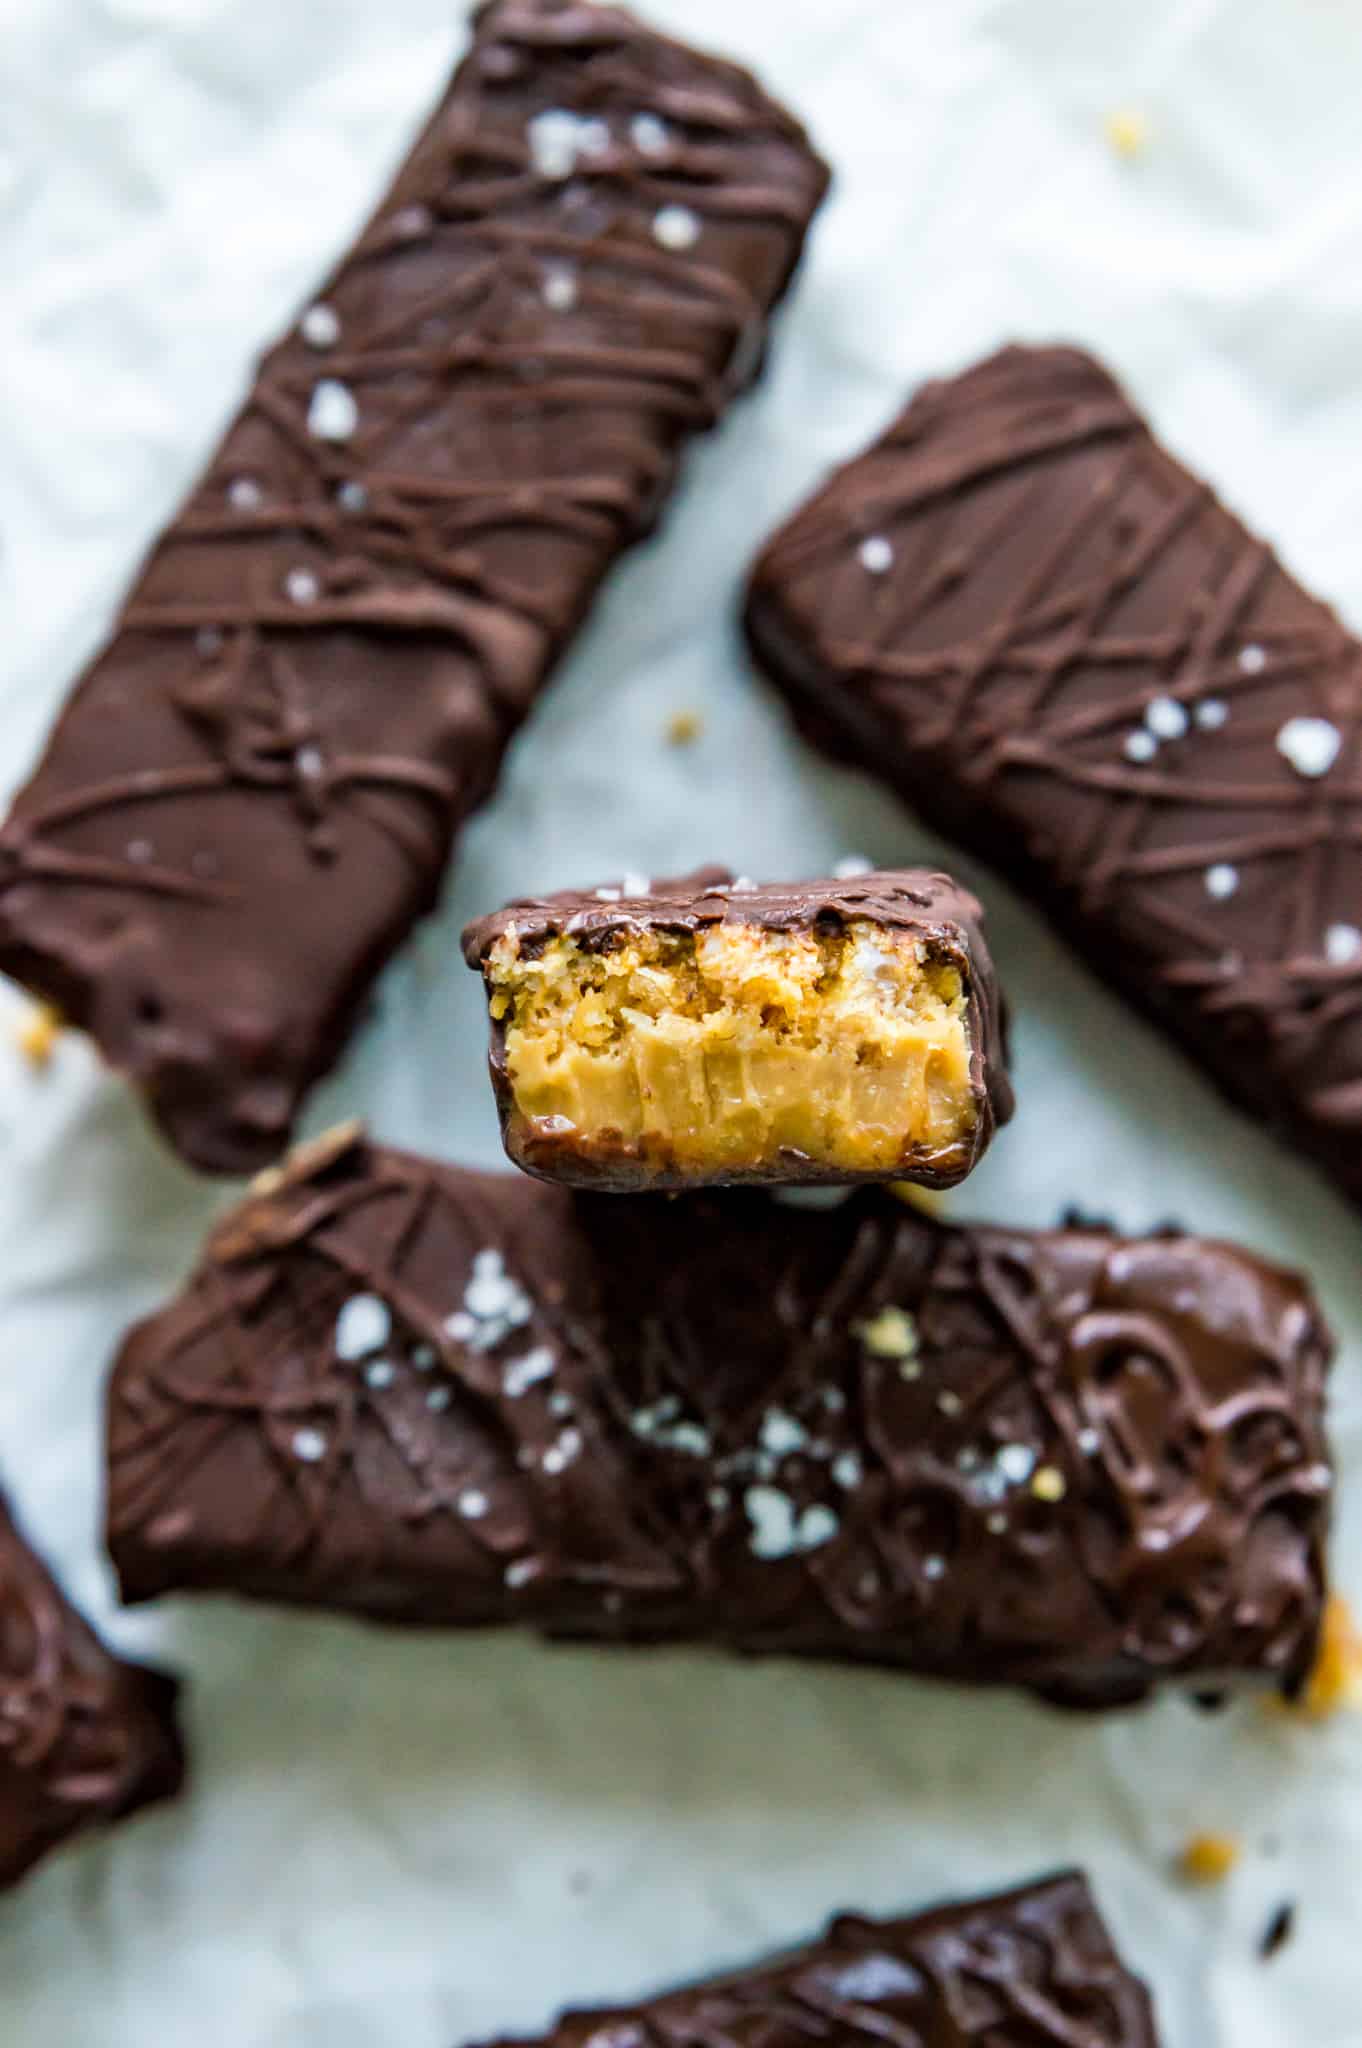 A homemade cereal bar with chocolate on it and a bite out of it